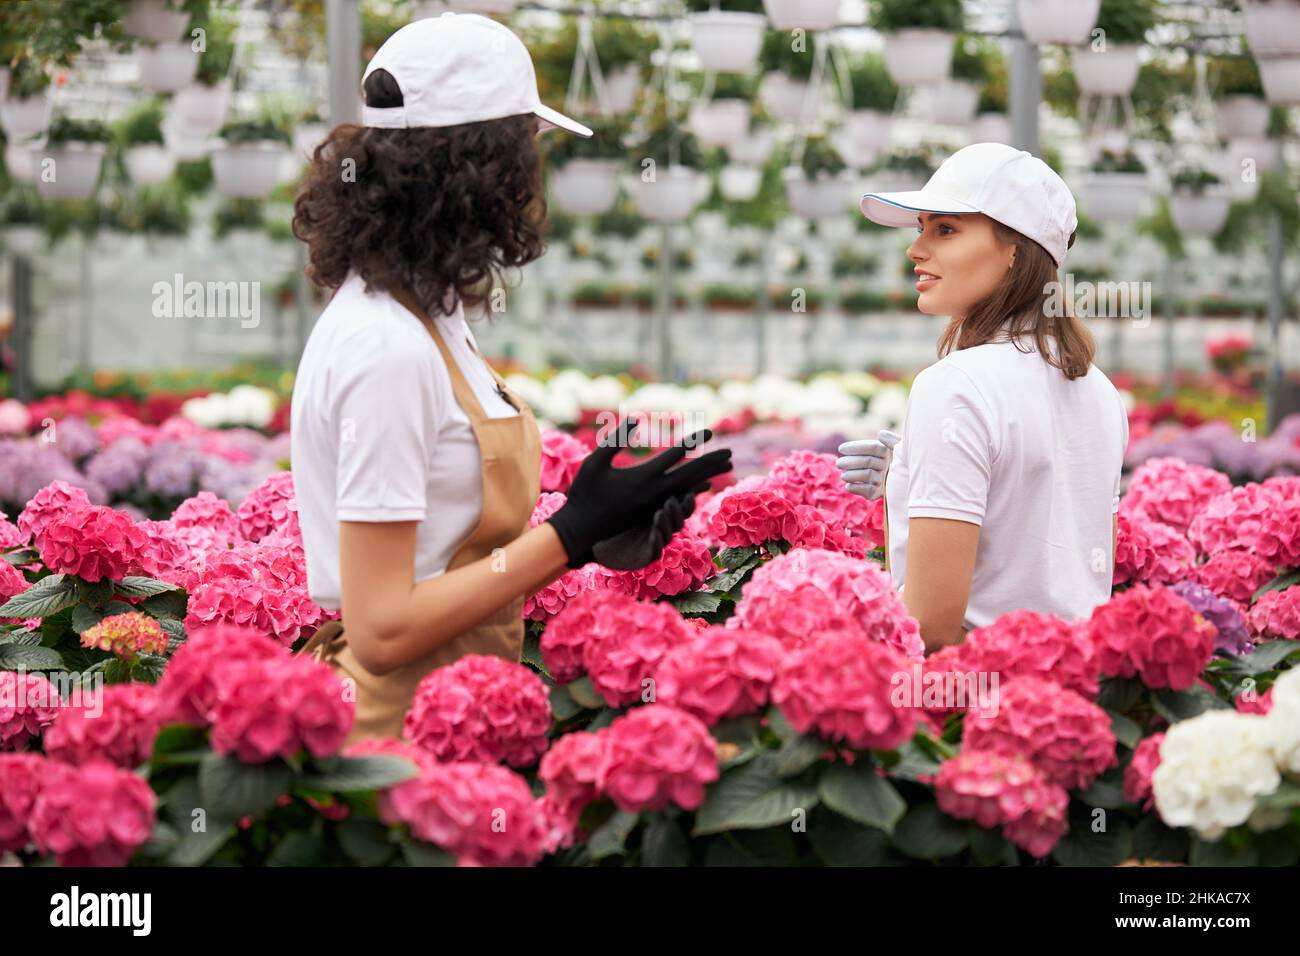 Two female florists in cap, apron and gloves cultivating colorful flowers at greenhouse. Young women working together with plants. Gardening concept. Stock Photo